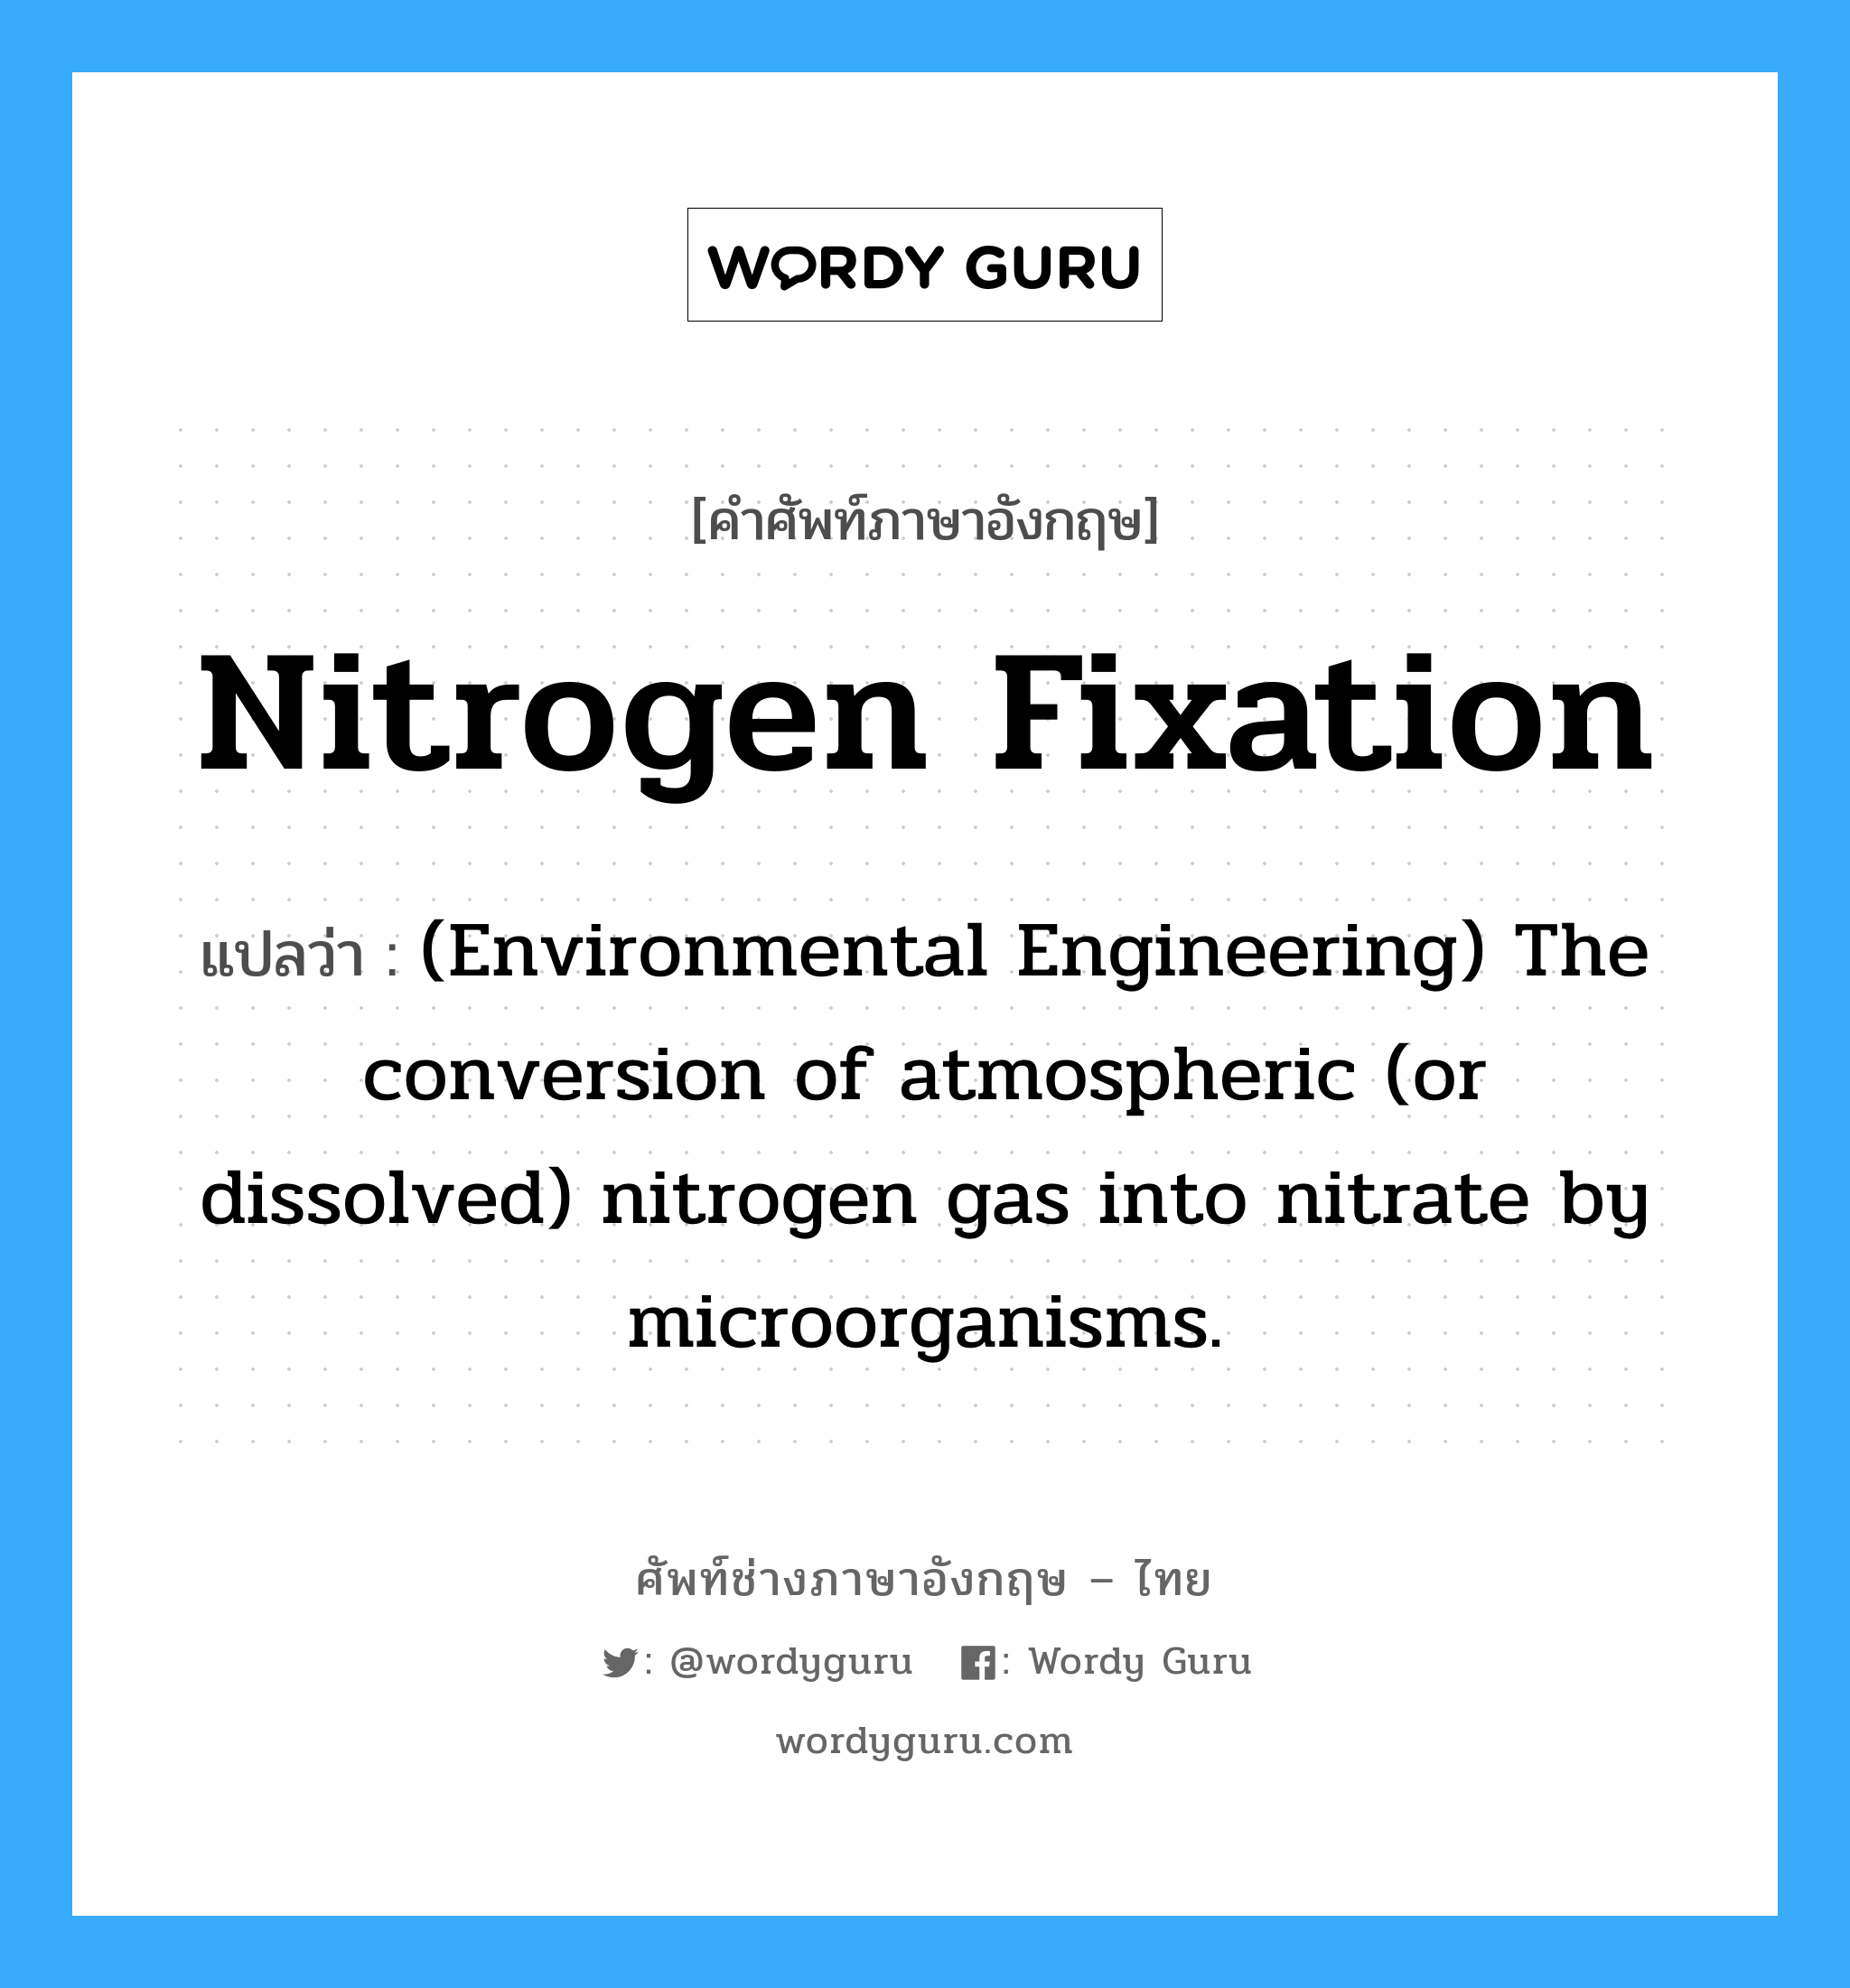 (Environmental Engineering) The conversion of atmospheric (or dissolved) nitrogen gas into nitrate by microorganisms. ภาษาอังกฤษ?, คำศัพท์ช่างภาษาอังกฤษ - ไทย (Environmental Engineering) The conversion of atmospheric (or dissolved) nitrogen gas into nitrate by microorganisms. คำศัพท์ภาษาอังกฤษ (Environmental Engineering) The conversion of atmospheric (or dissolved) nitrogen gas into nitrate by microorganisms. แปลว่า Nitrogen fixation